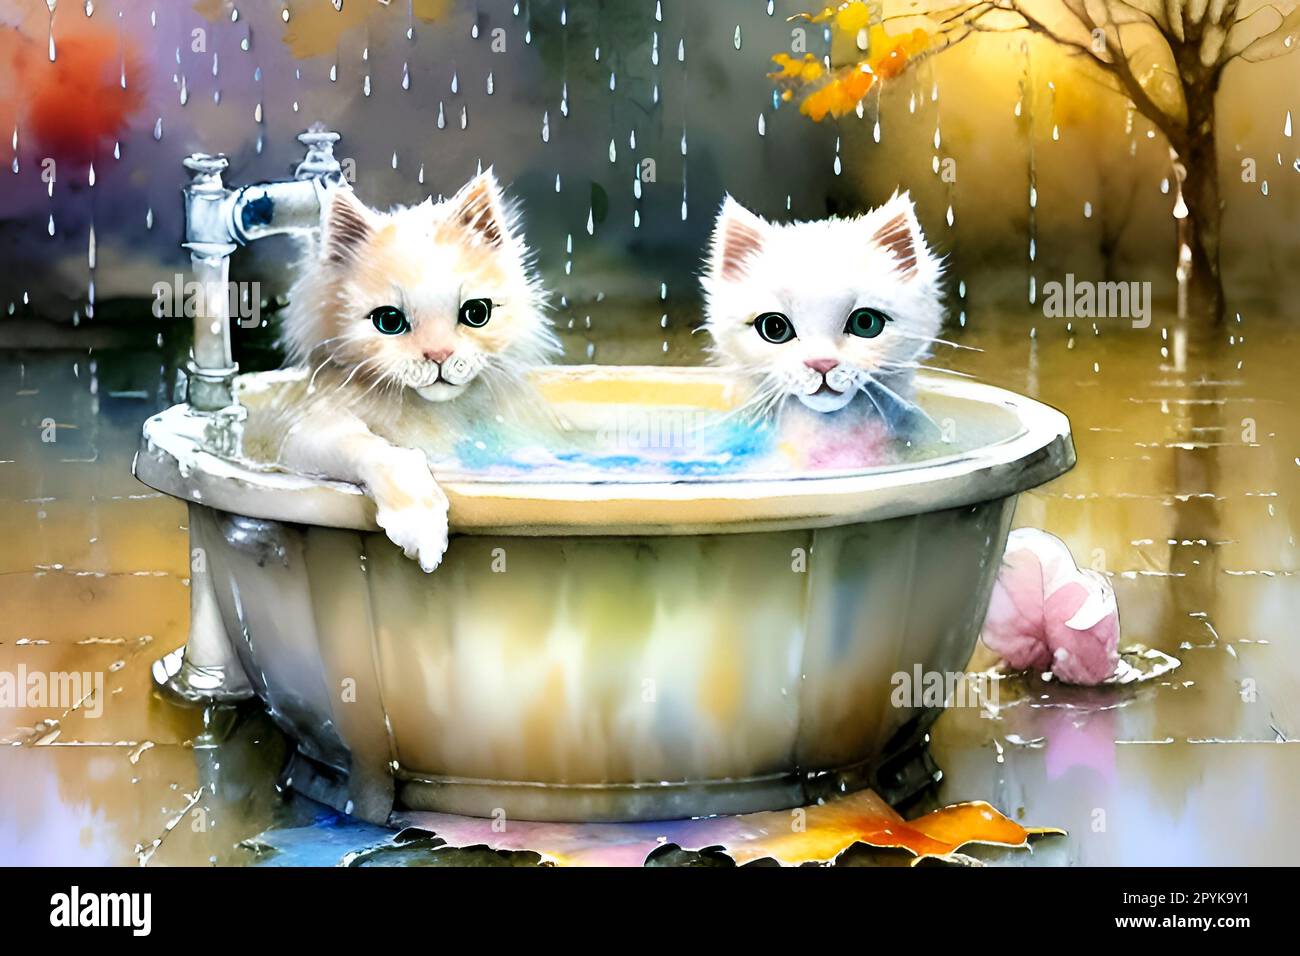 cat washing the bath in the bathroom Stock Photo